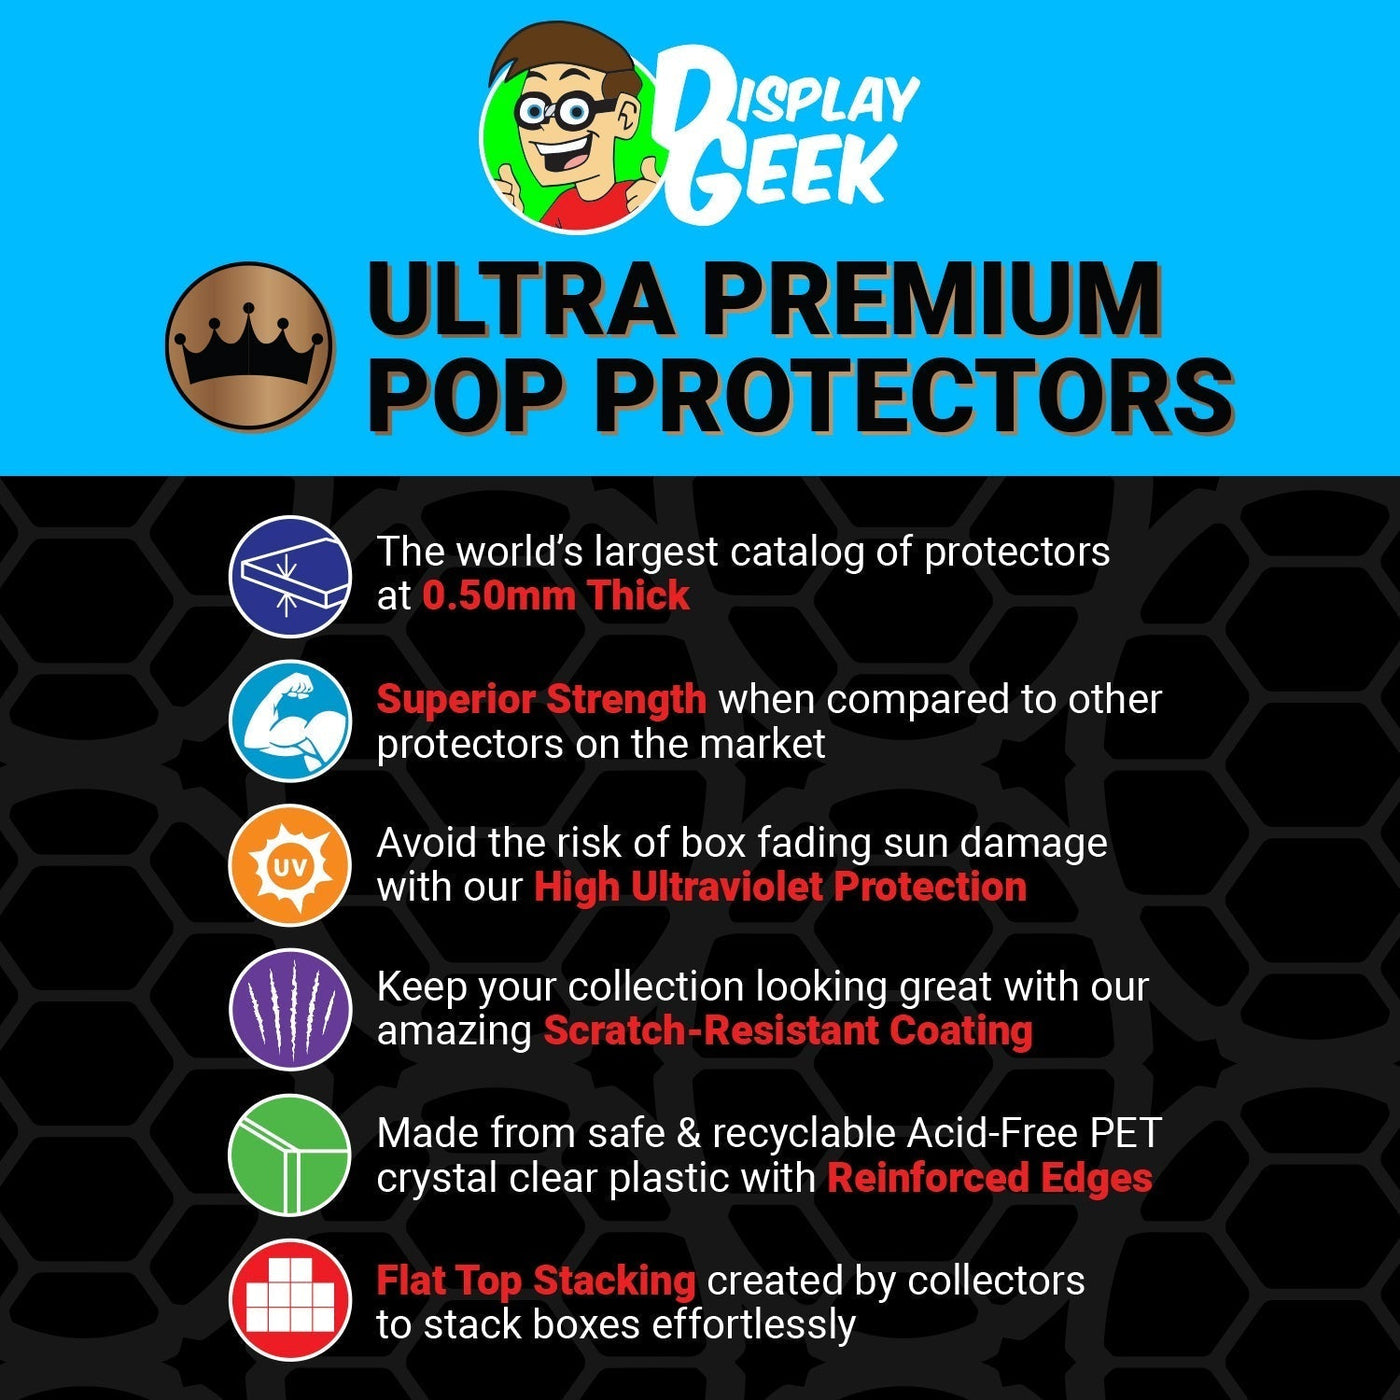 Pop Protector for 3 Pack Mrs. Who, Mrs. Which & Mrs. Whatsit Funko Pop on The Protector Guide App by Display Geek